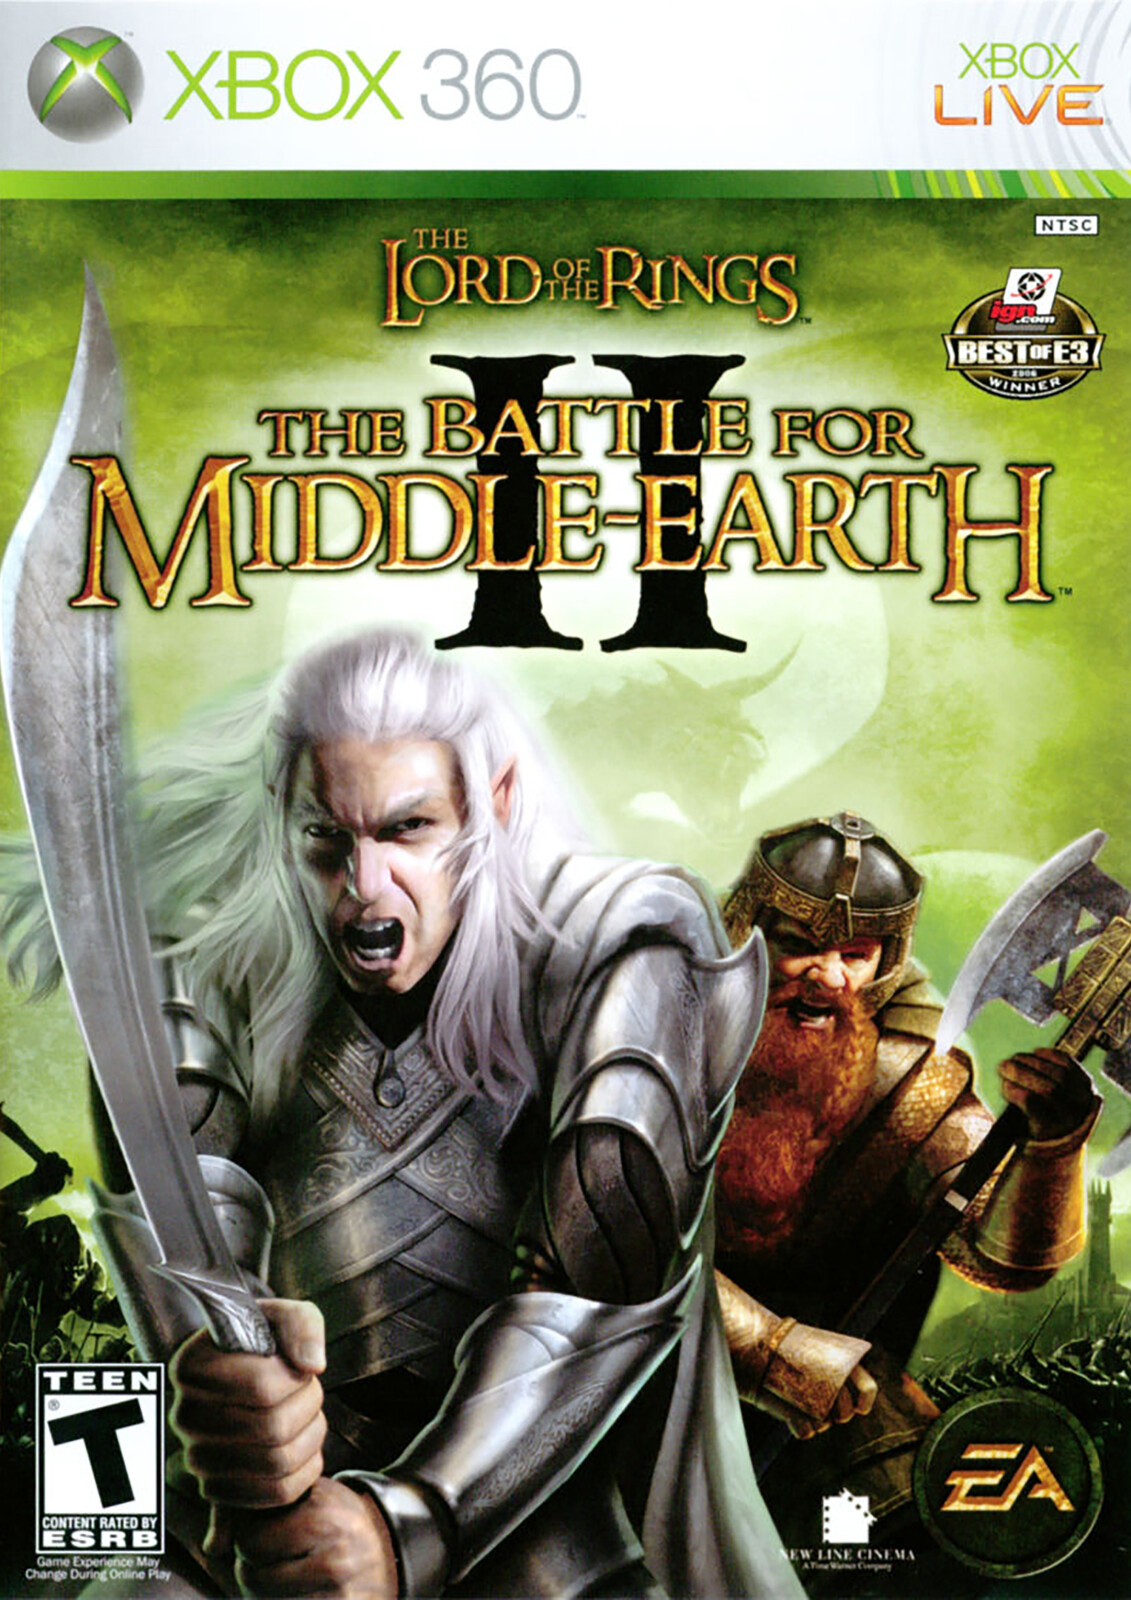 LOTR: The Battle For Middle Earth II